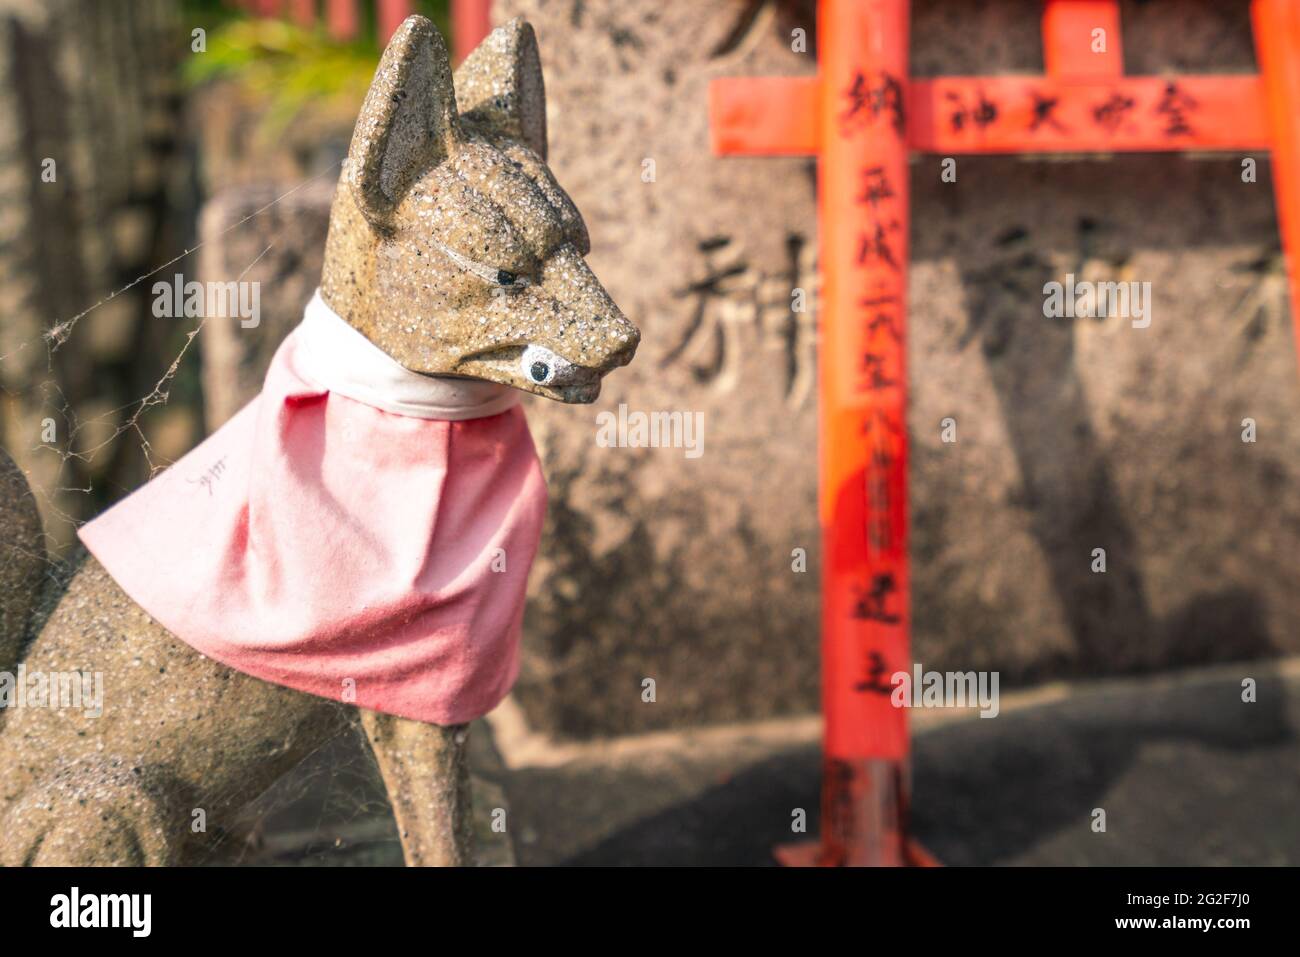 Kyoto, Japan - 05.19.2019: A stone statue of dog with eyeball in its mouth with a pink neck scarf on a tombstone in a cemetery in Kyoto Stock Photo